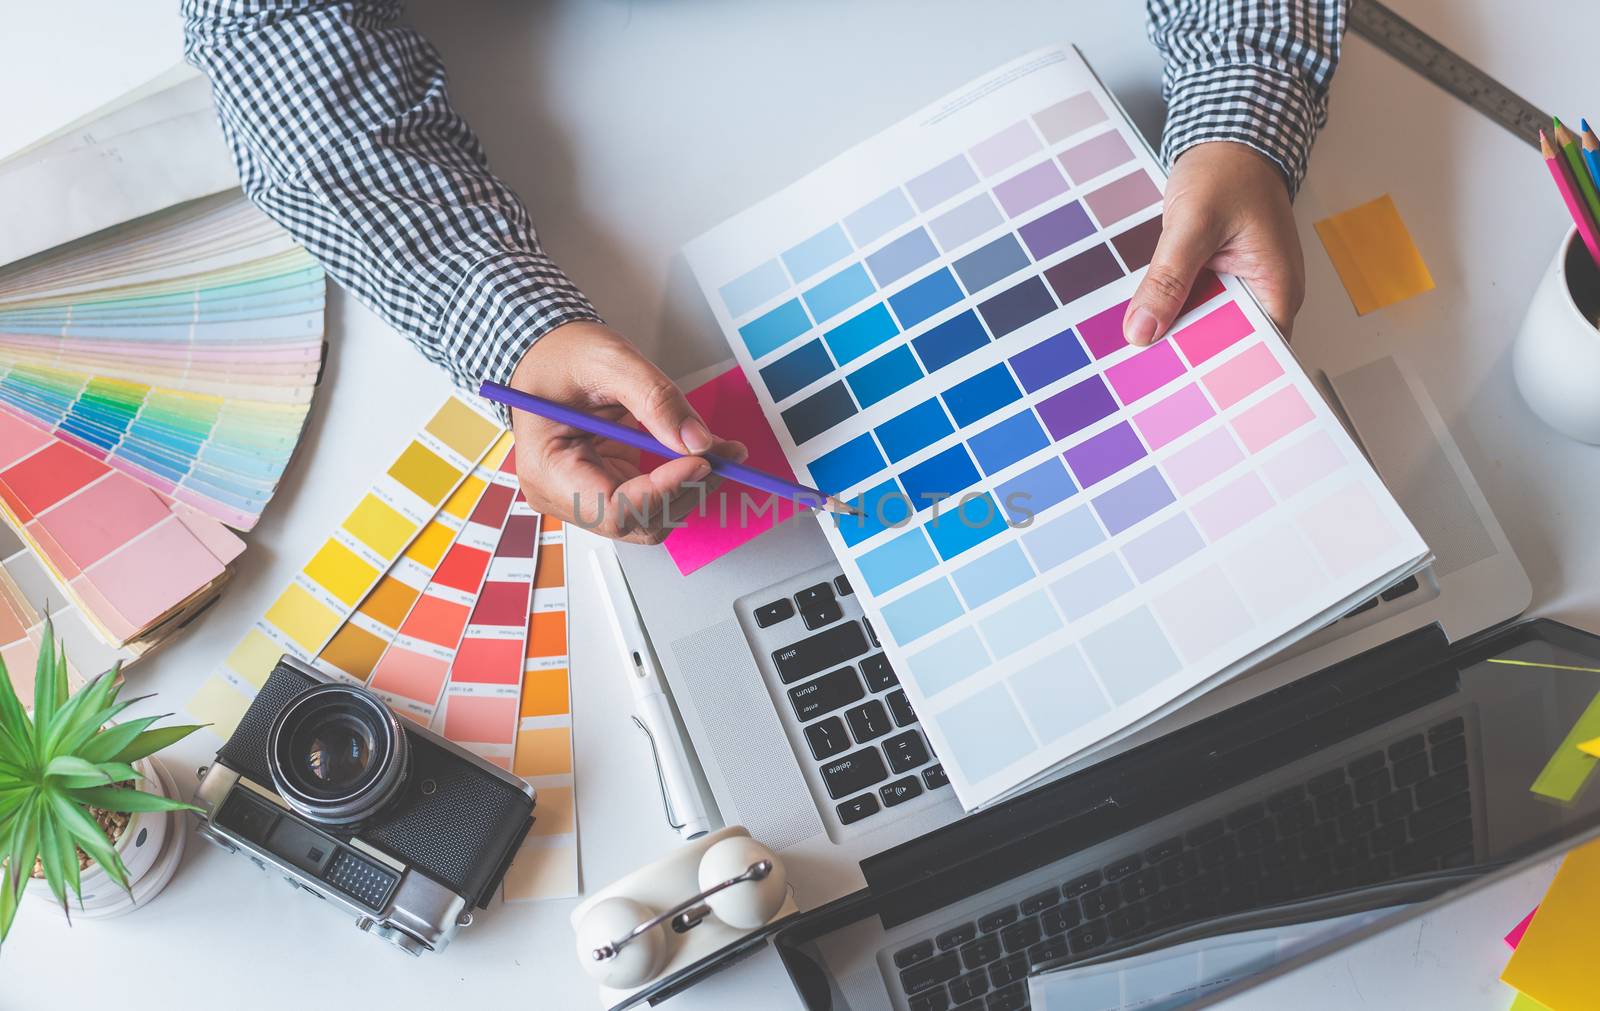 The graphic designer creative team is currently working on the design and color selection on the guide color for advertising design.